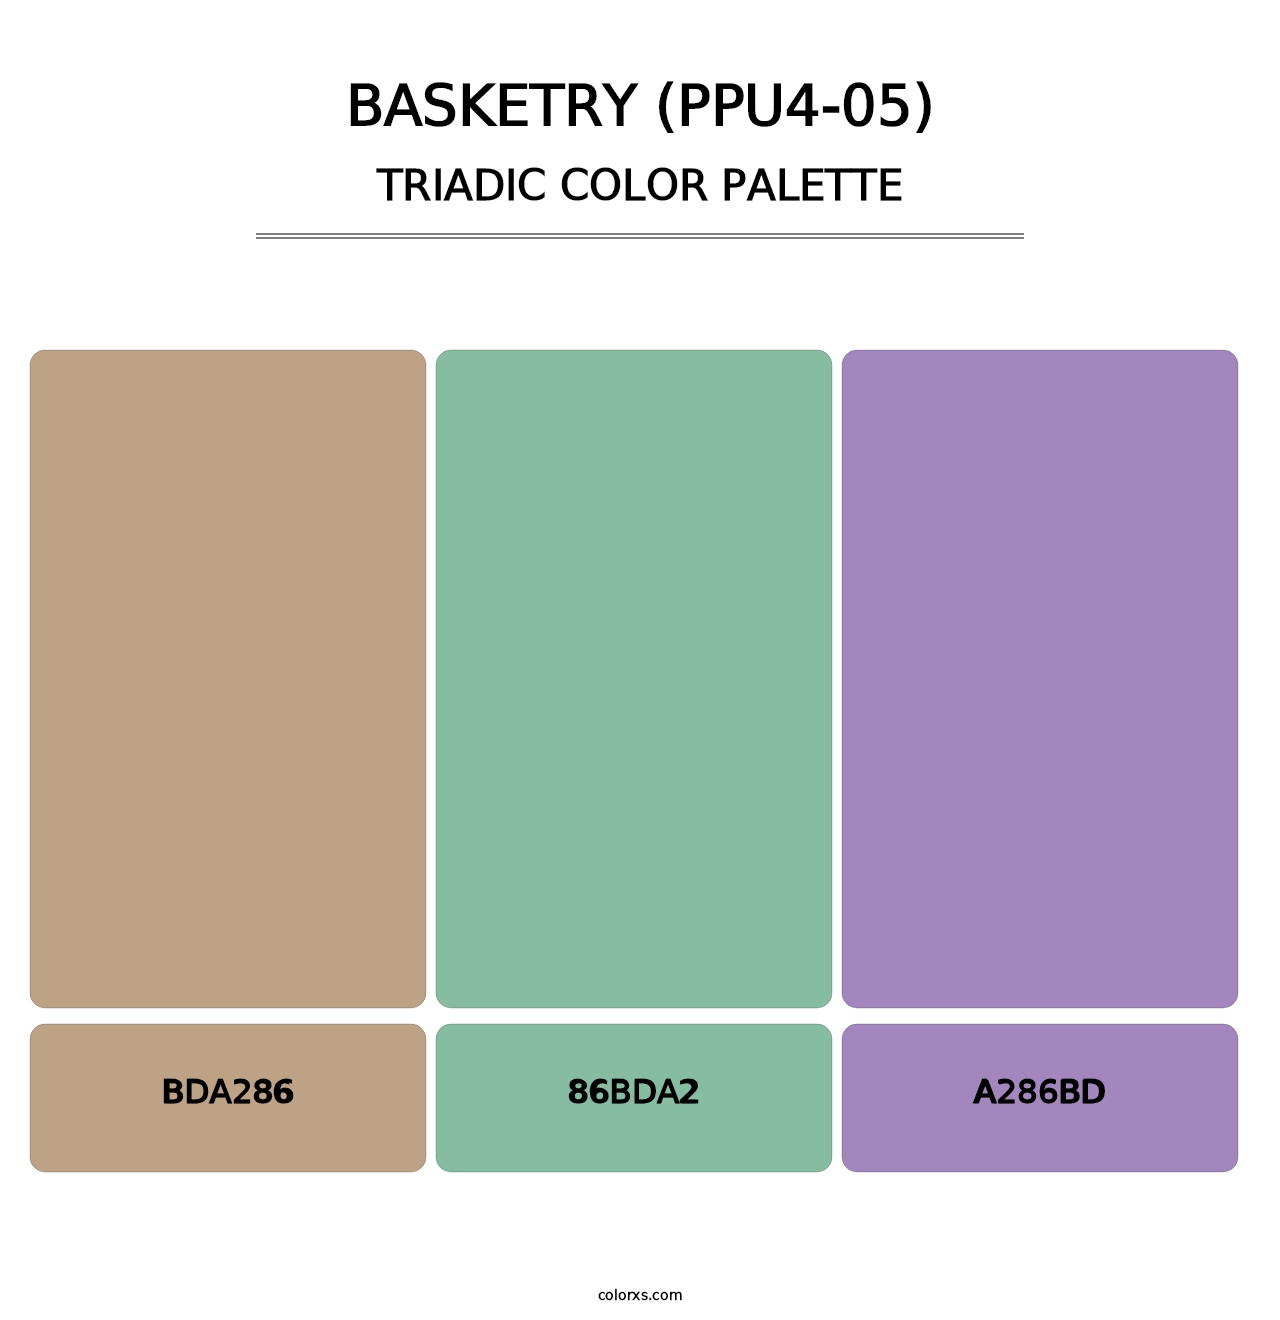 Basketry (PPU4-05) - Triadic Color Palette